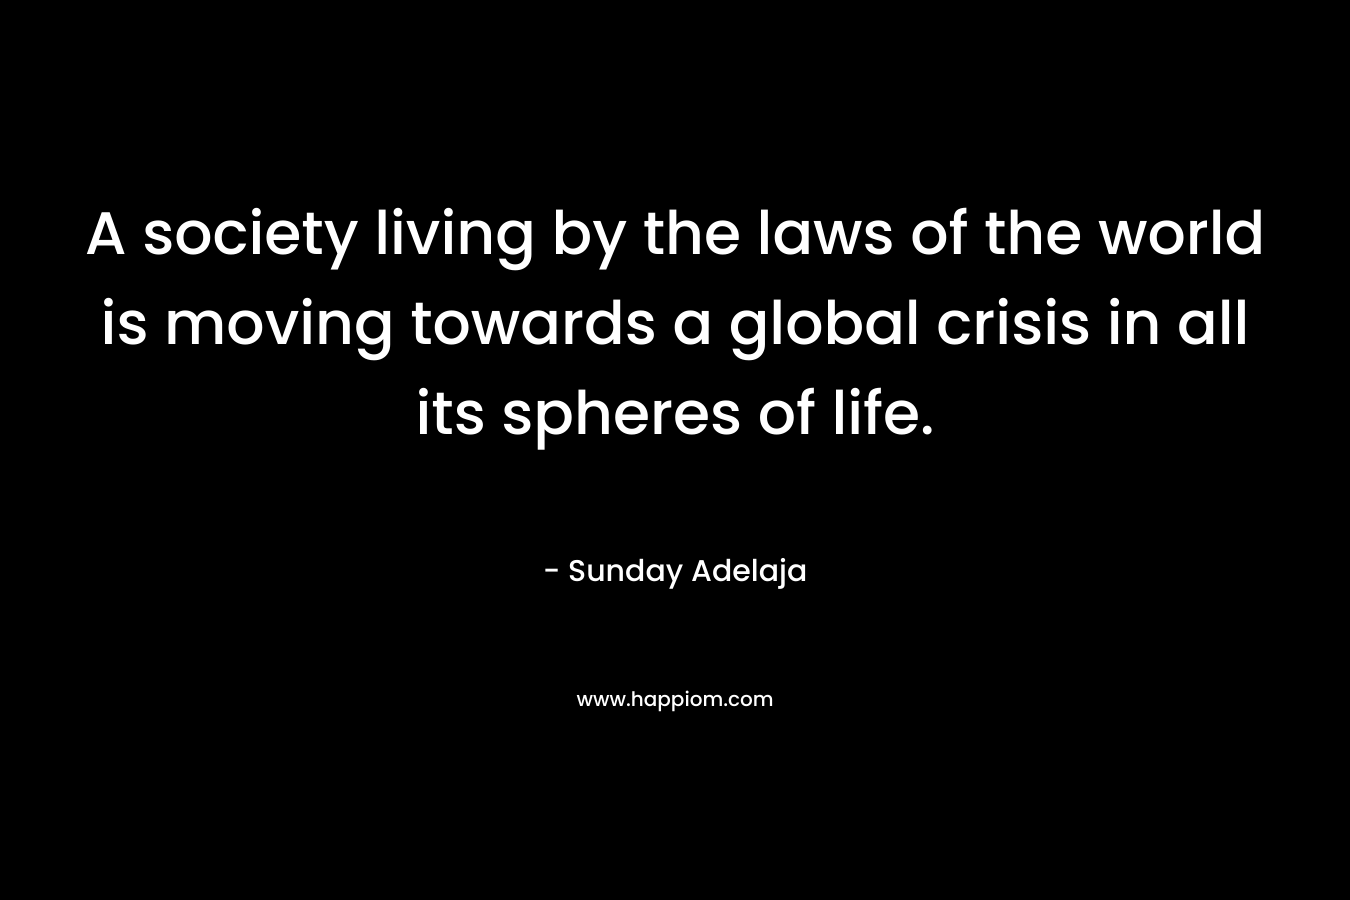 A society living by the laws of the world is moving towards a global crisis in all its spheres of life.